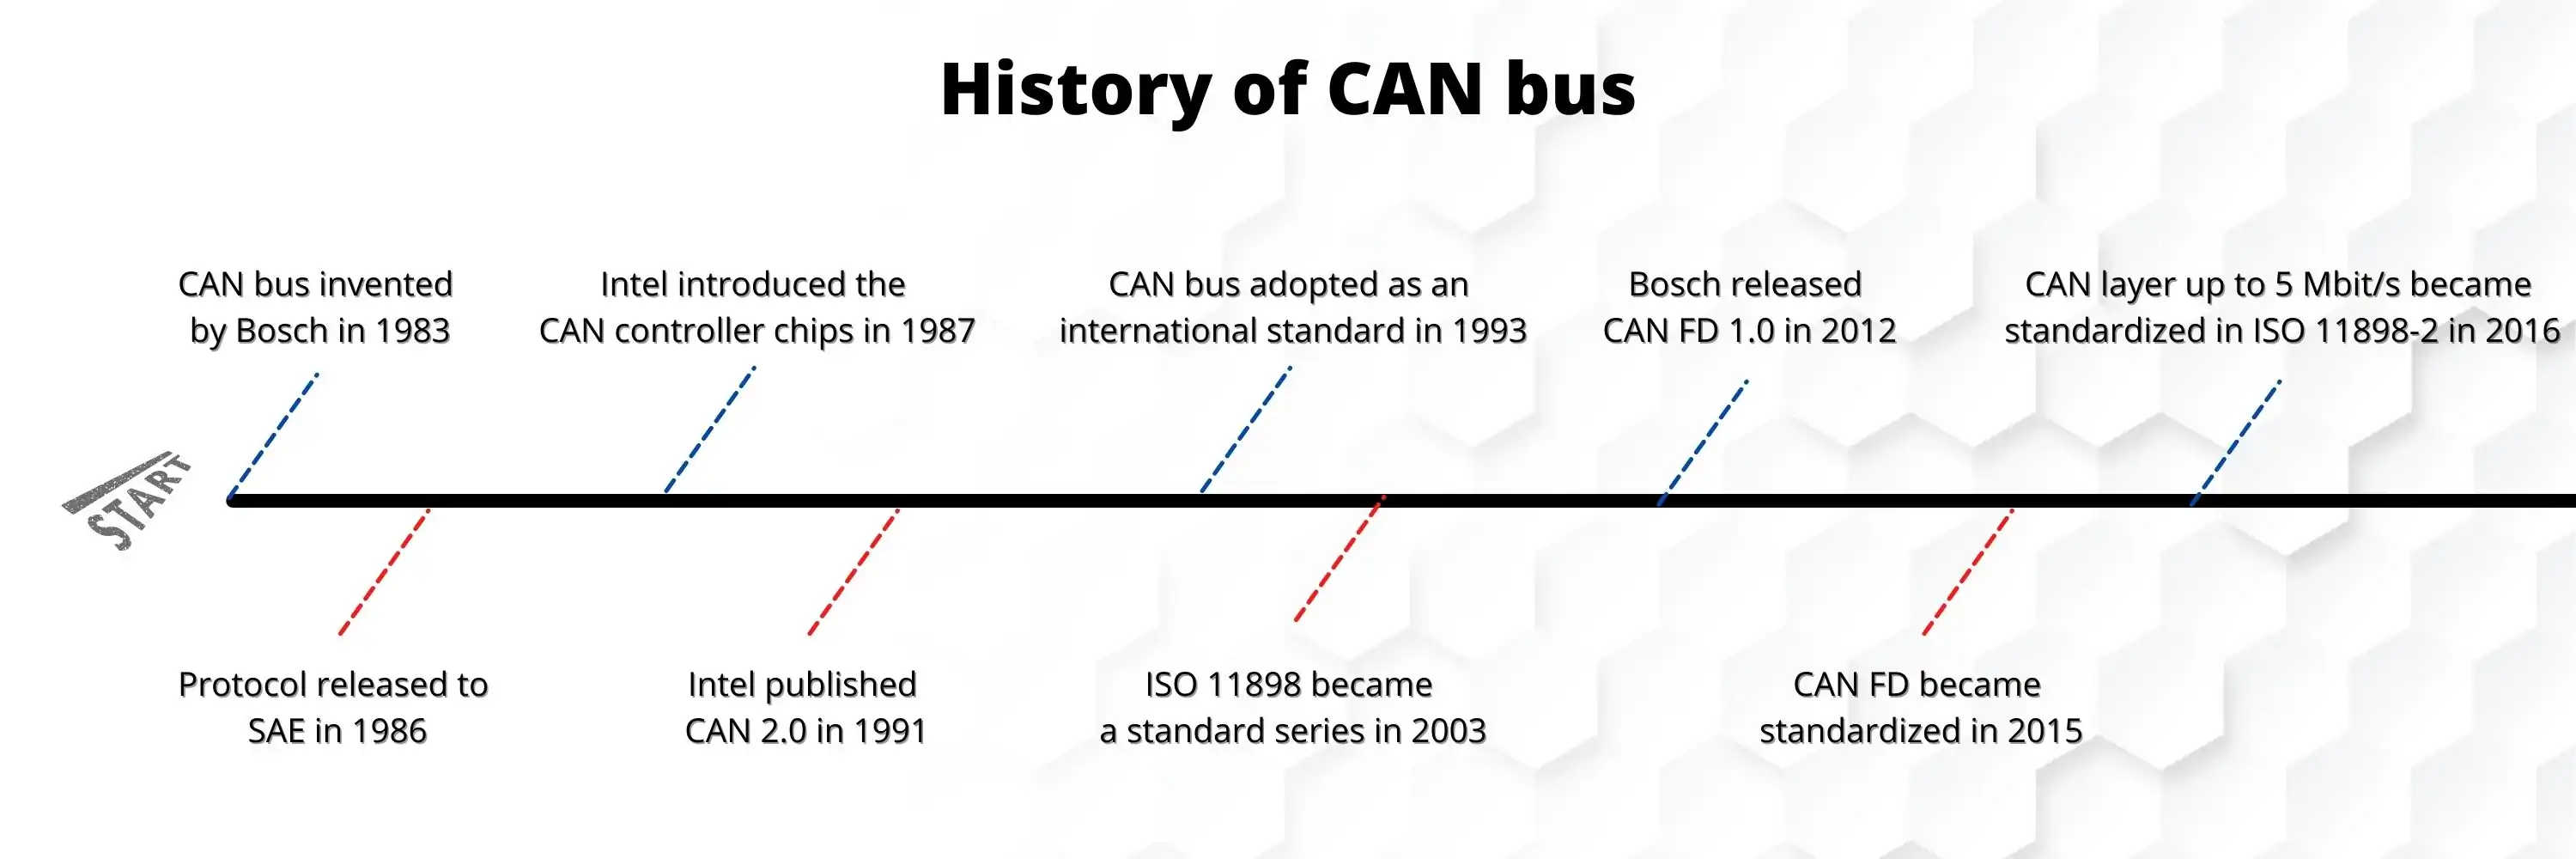 a timeline showing the history of CAN bus and its versions